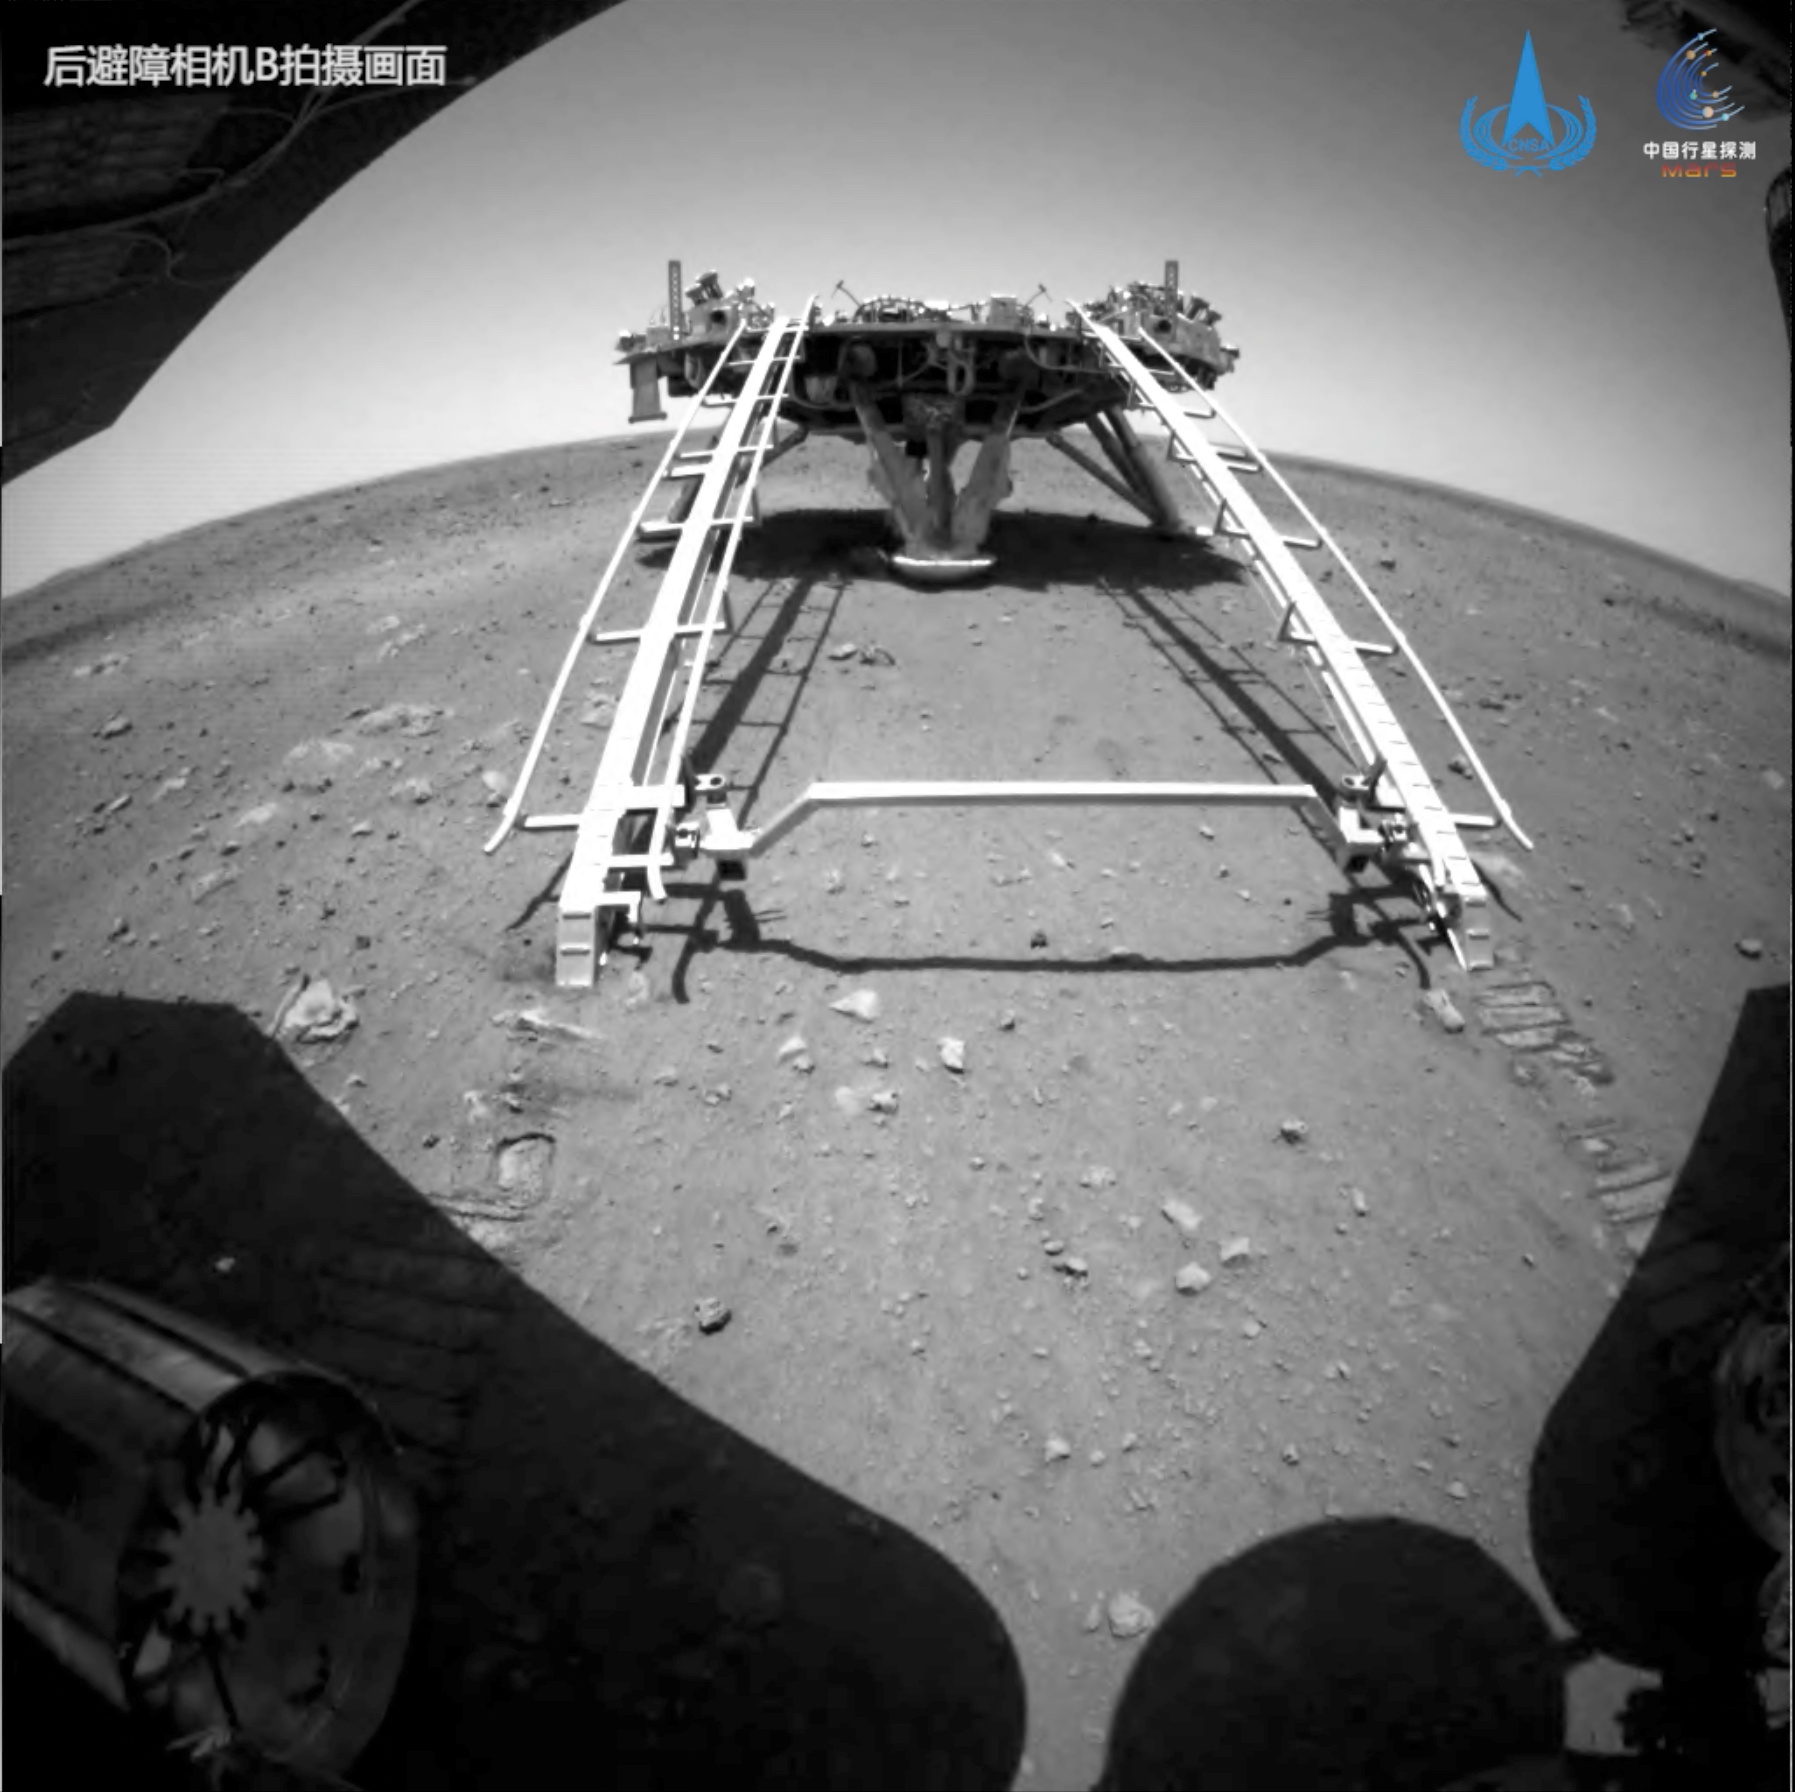 China says Martian rover takes first drive on surface of Red Planet |  Reuters